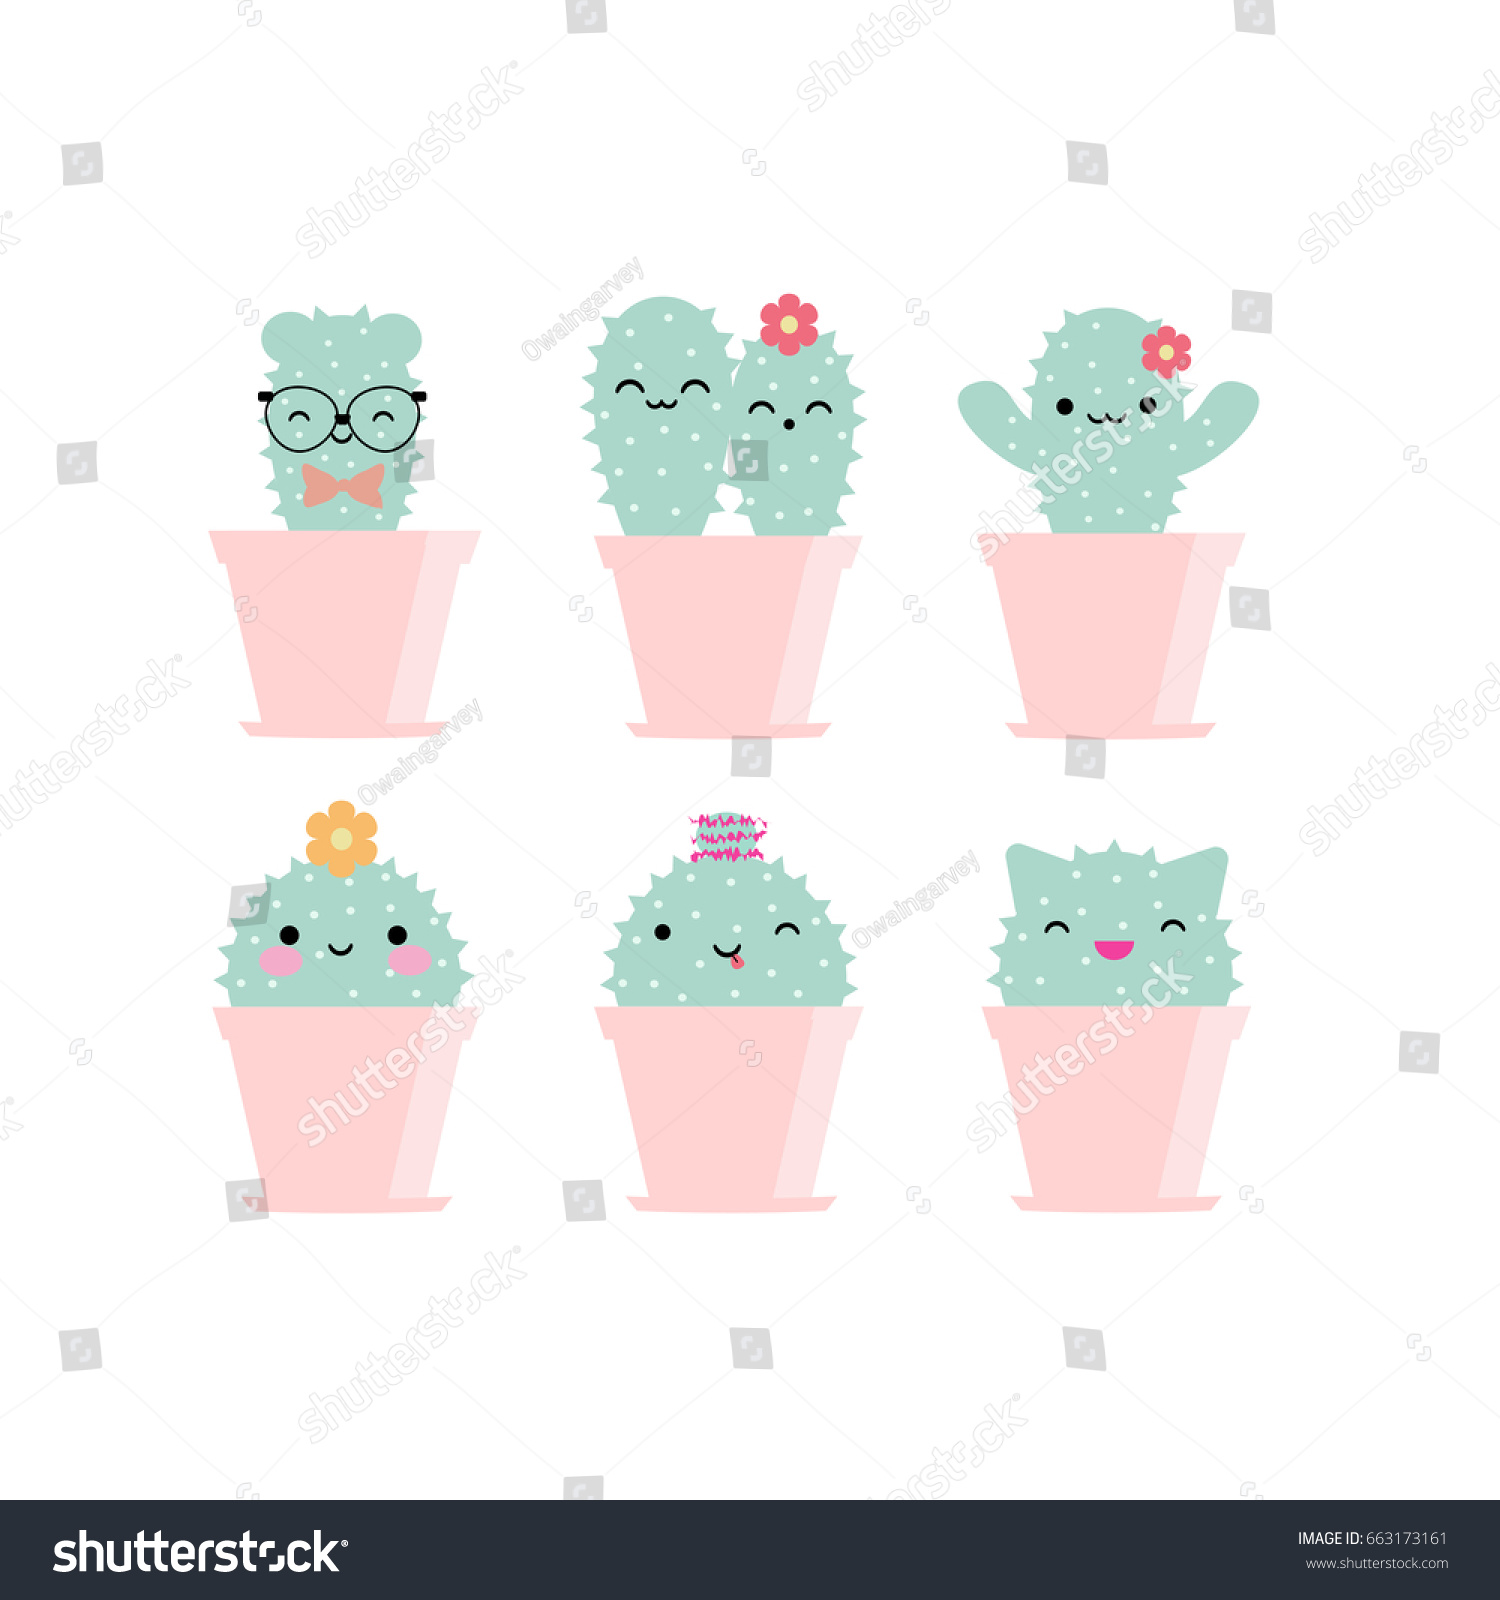 Vector kawaii cactuses with funny faces in pink pots #663173161